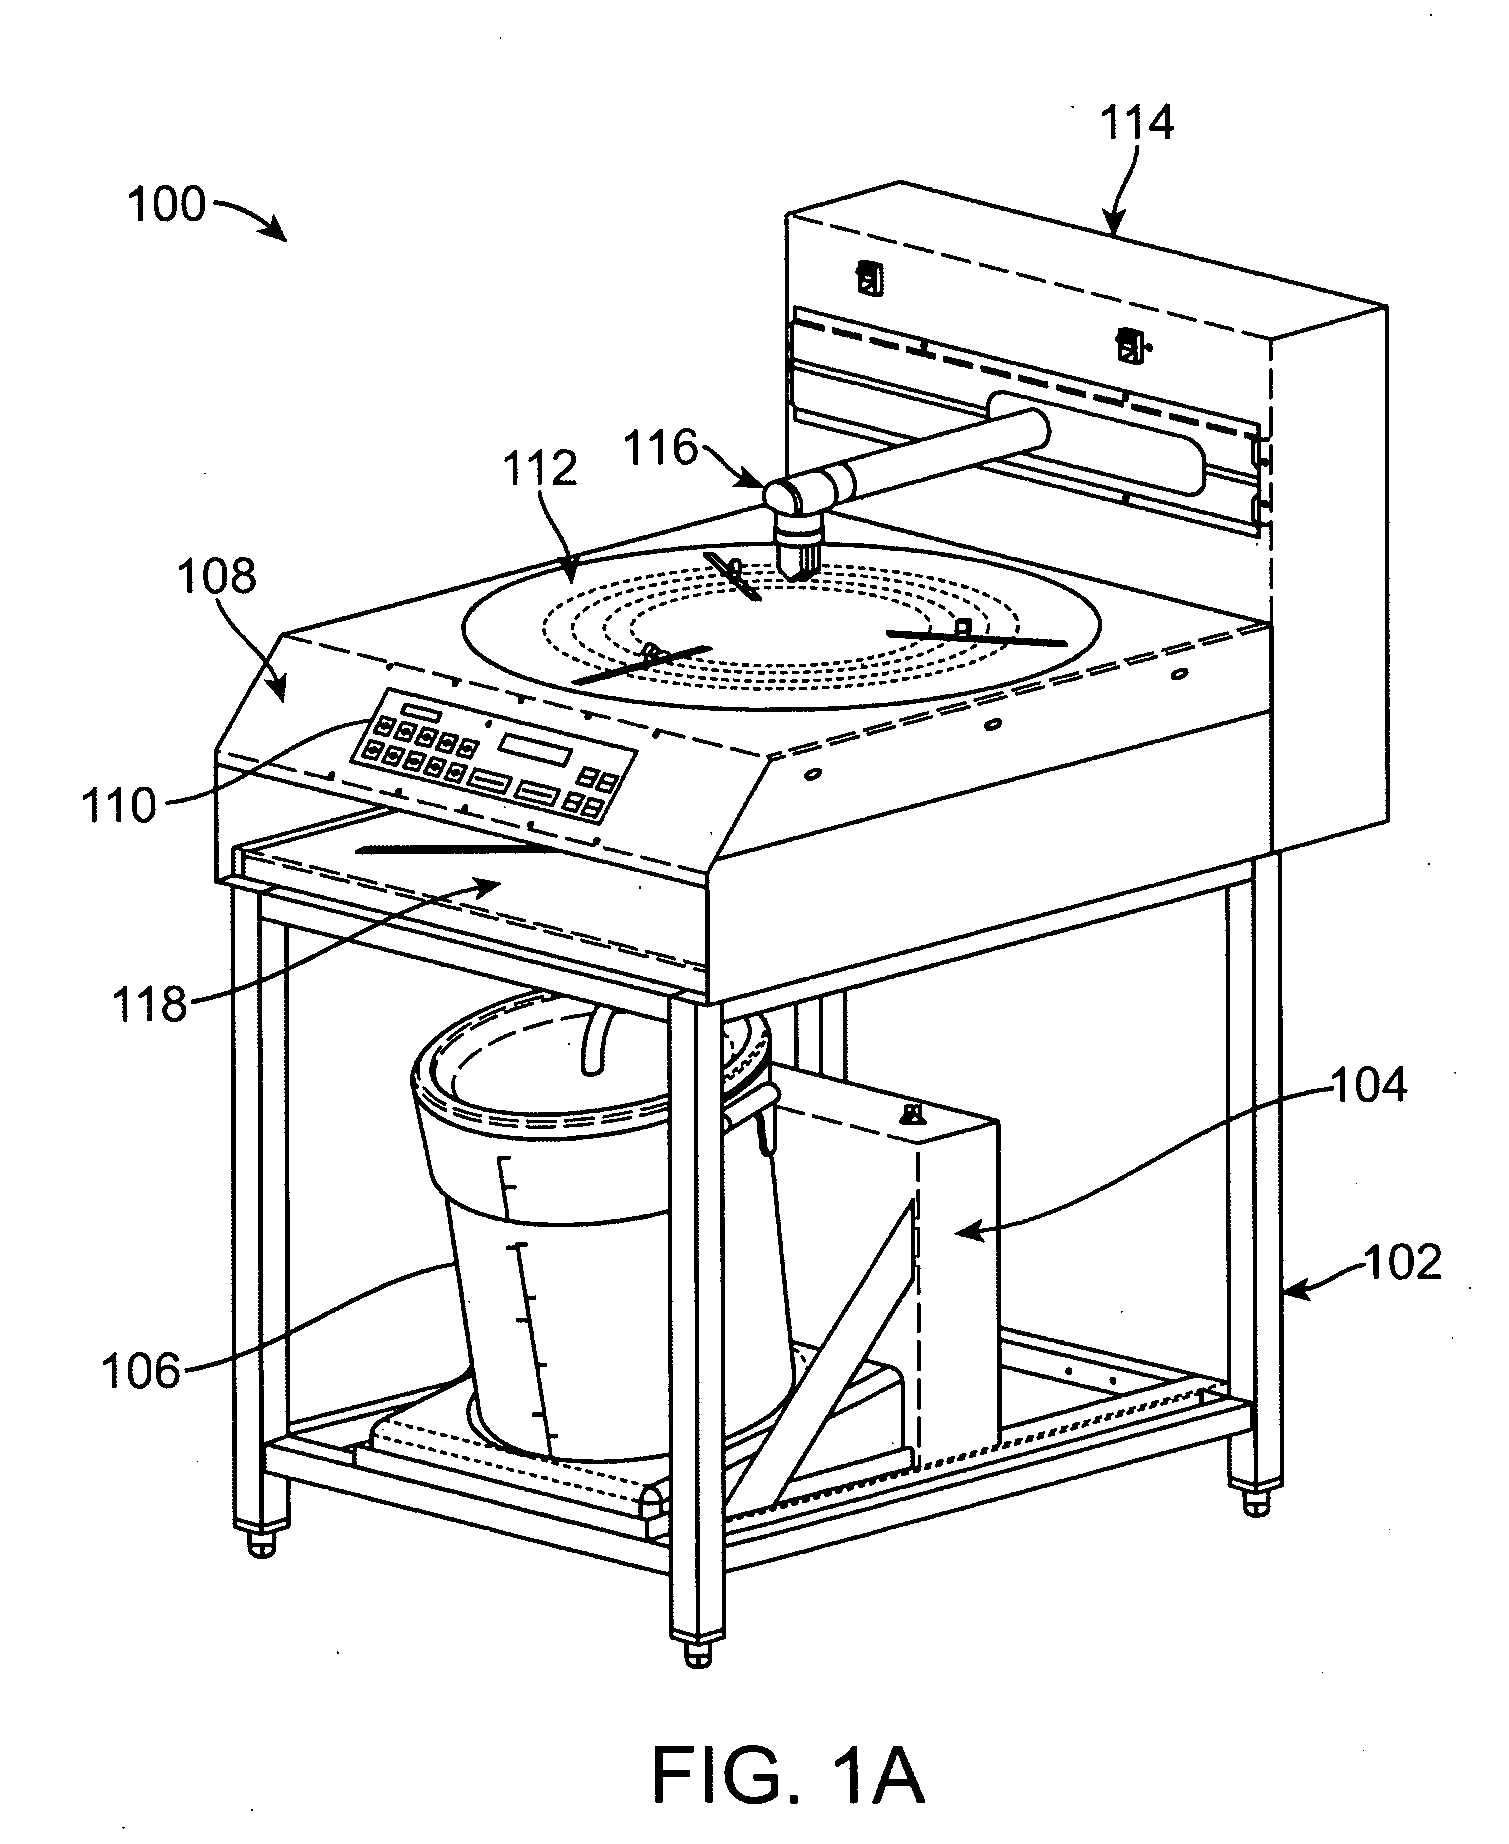 Cassette and Vat Supply Source for an On-Demand Mixing and Distributing of a Food Product